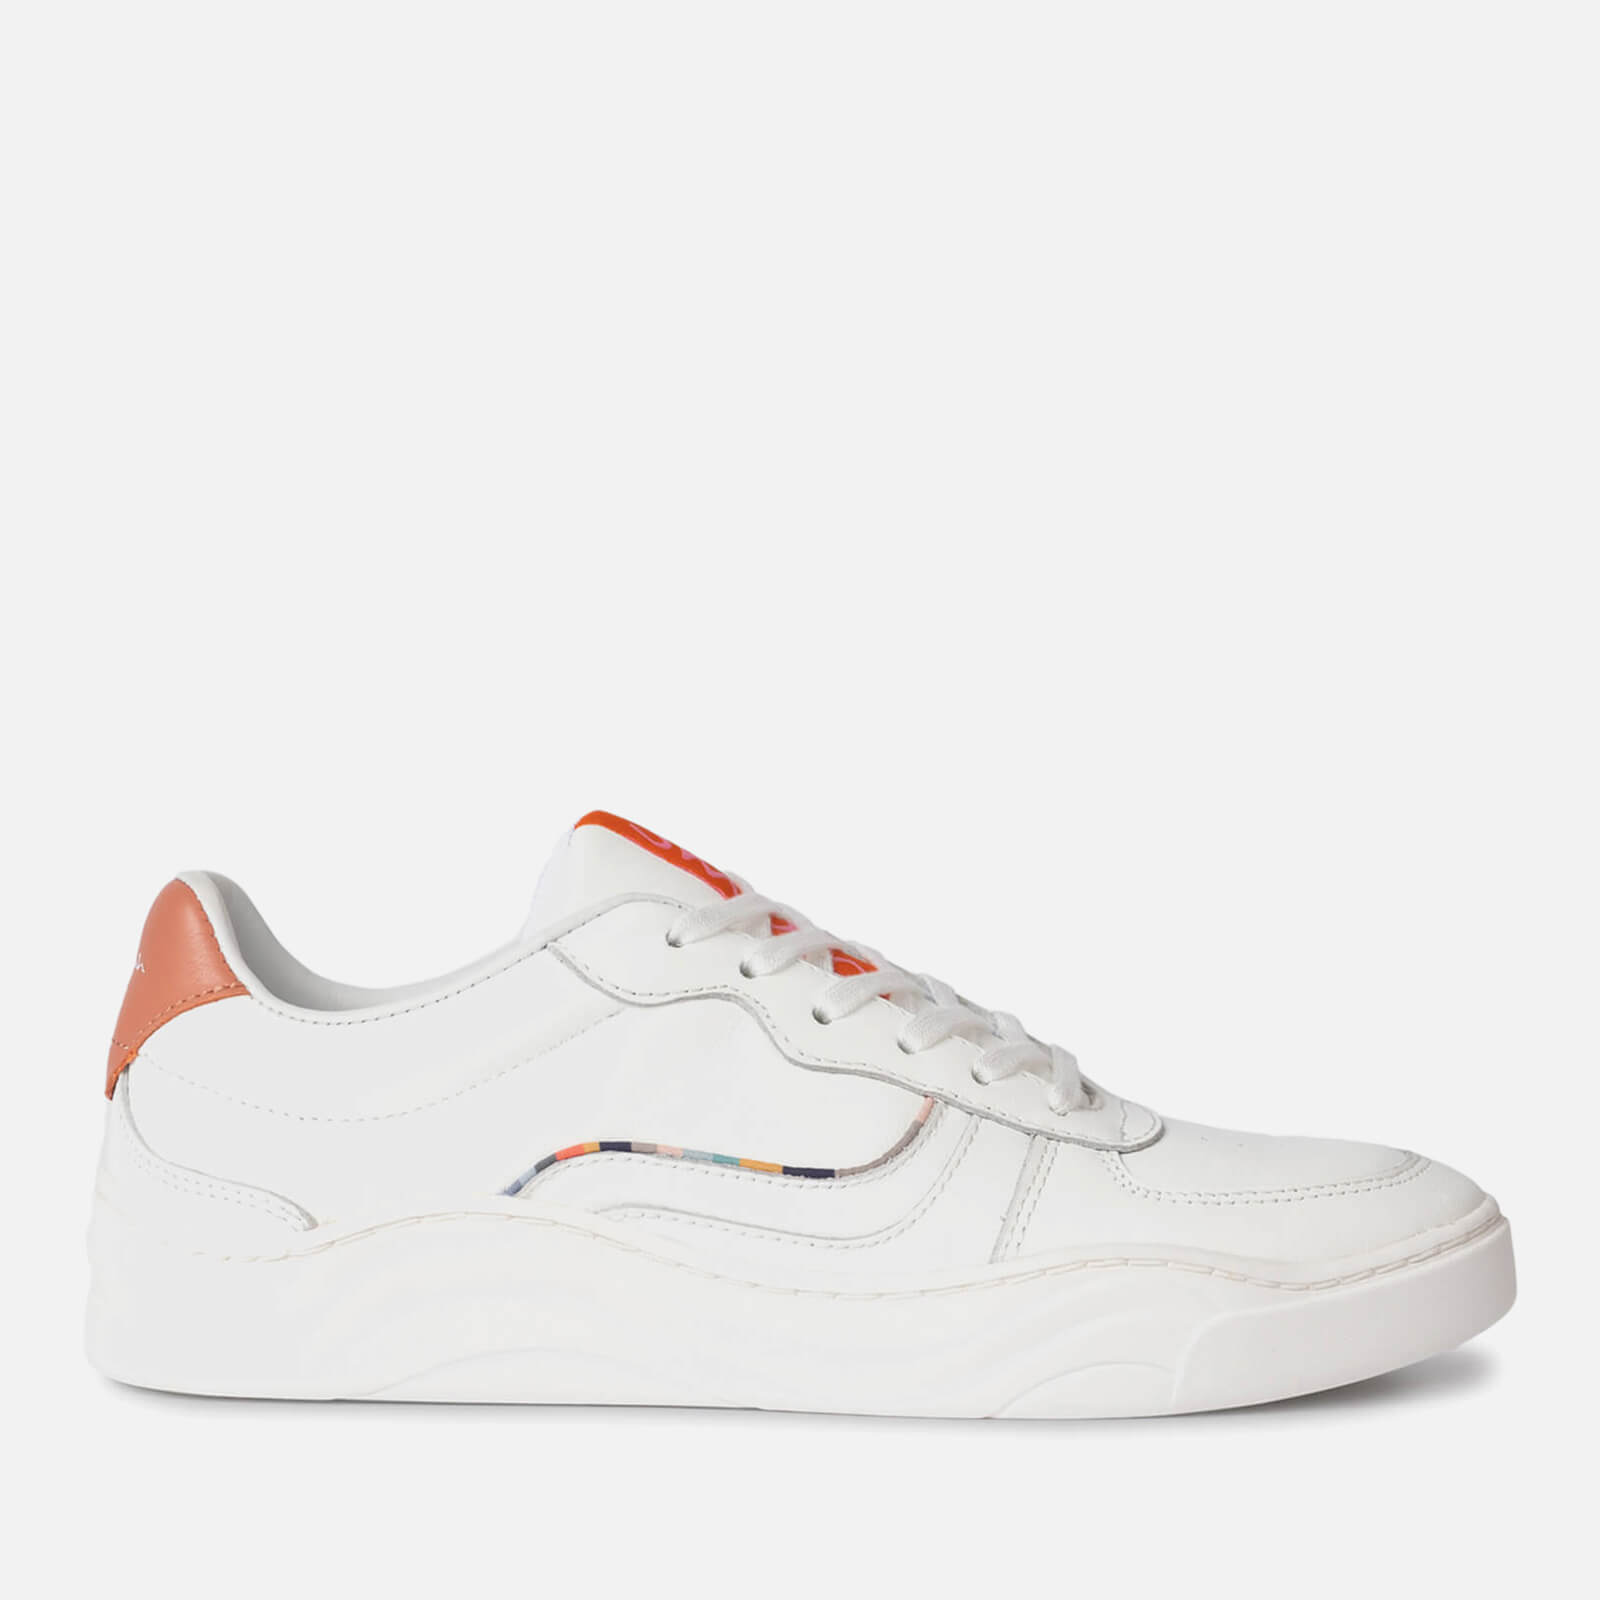 paul smith women's eden leather trainers - uk 3